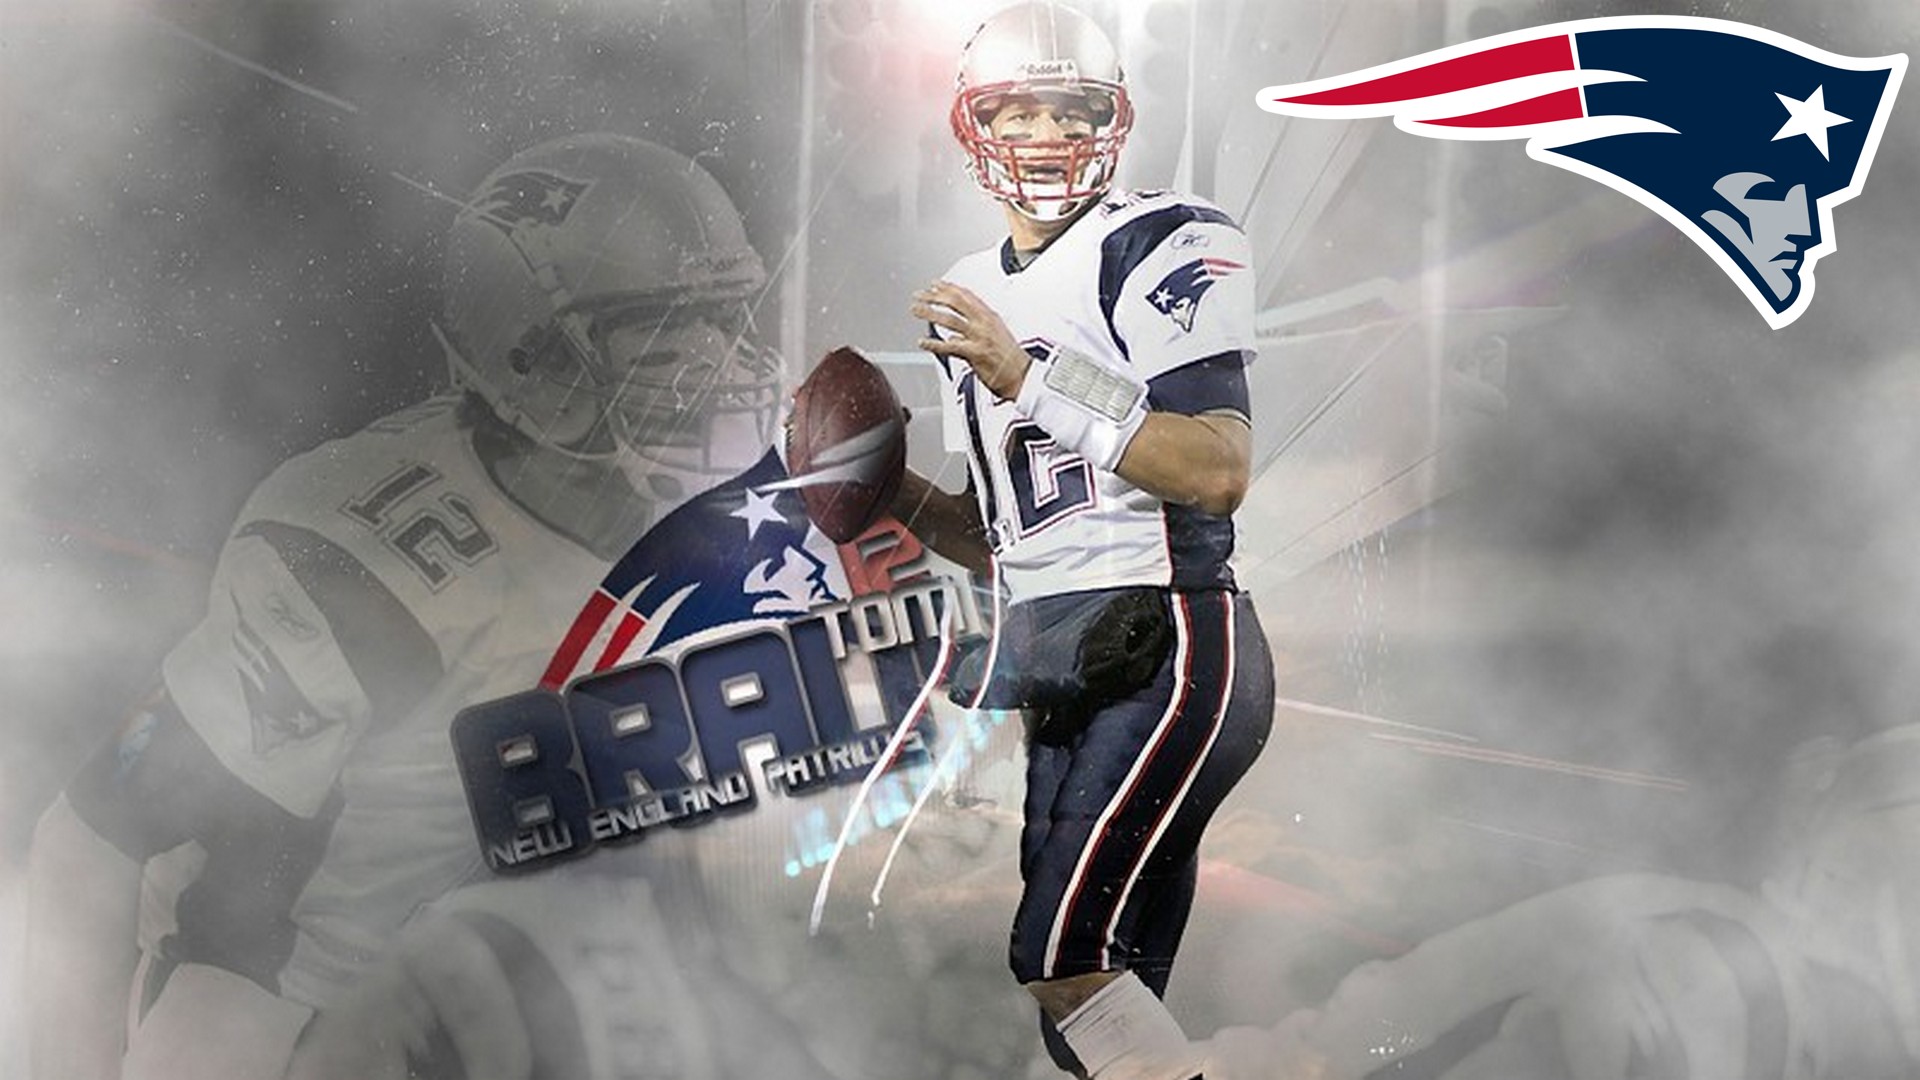 Wallpapers HD Tom Brady Super Bowl with resolution 1920x1080 pixel. You can make this wallpaper for your Mac or Windows Desktop Background, iPhone, Android or Tablet and another Smartphone device